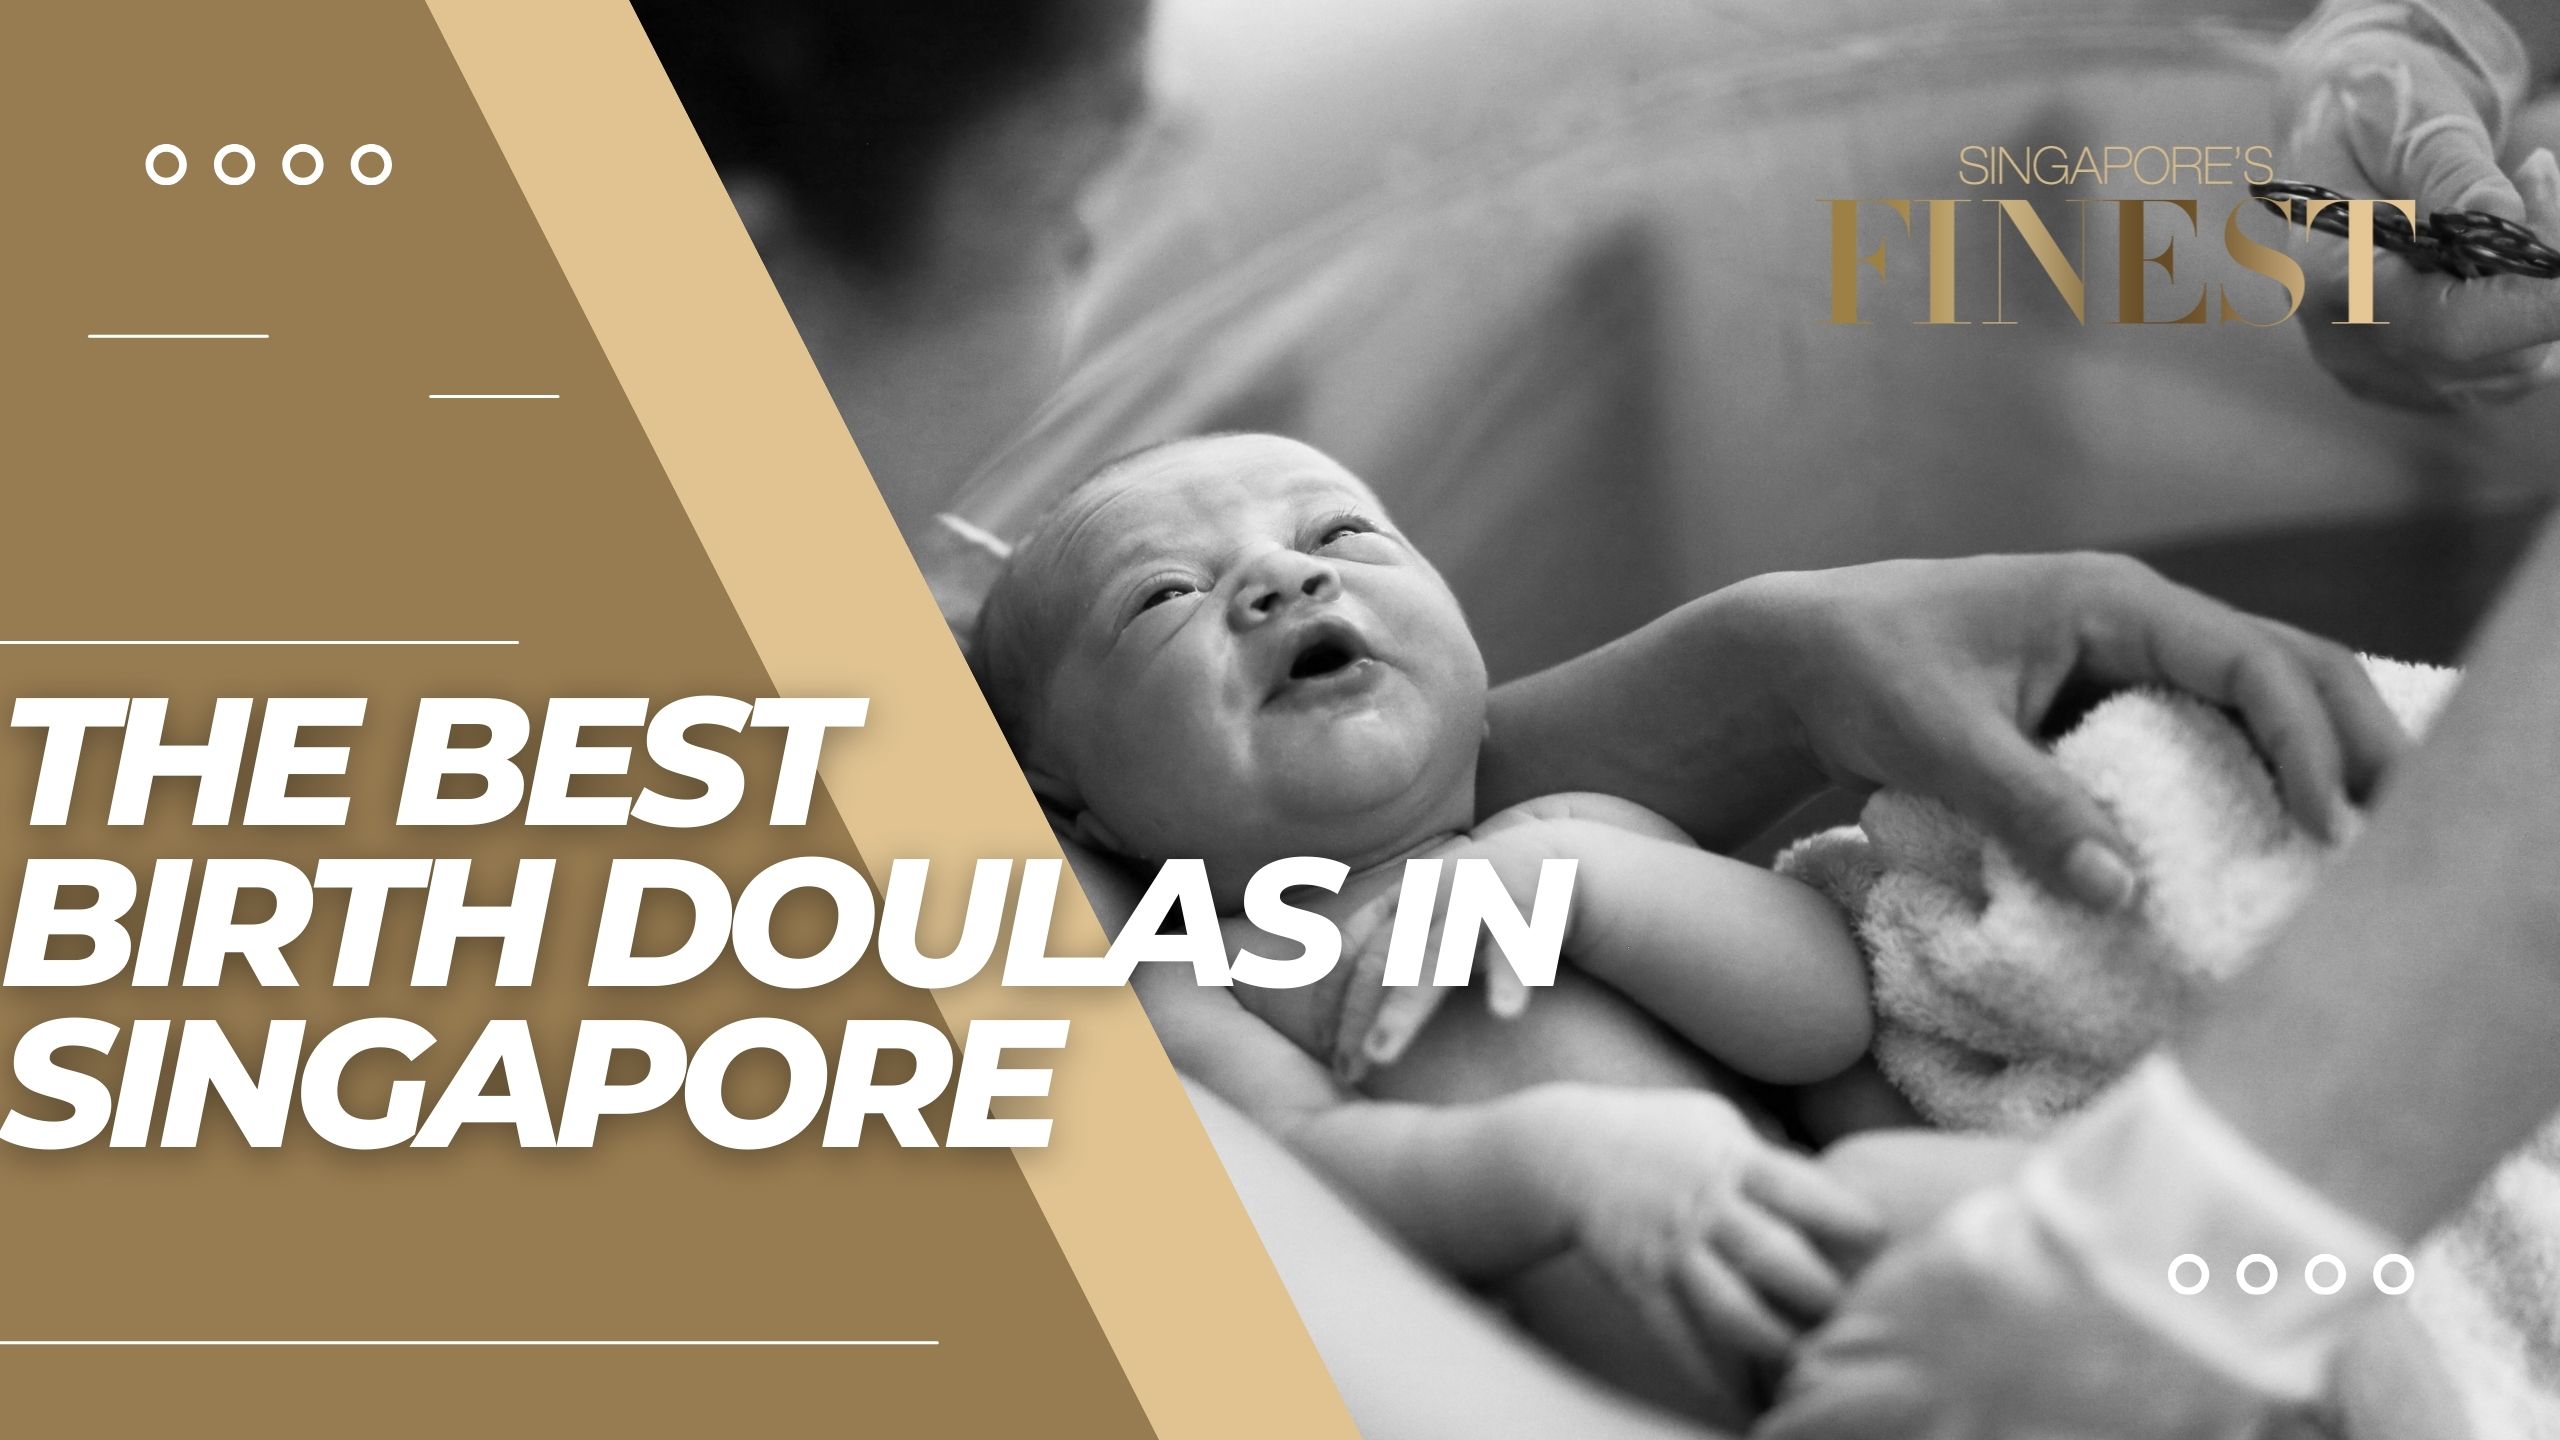 The Finest Birth Doulas in Singapore